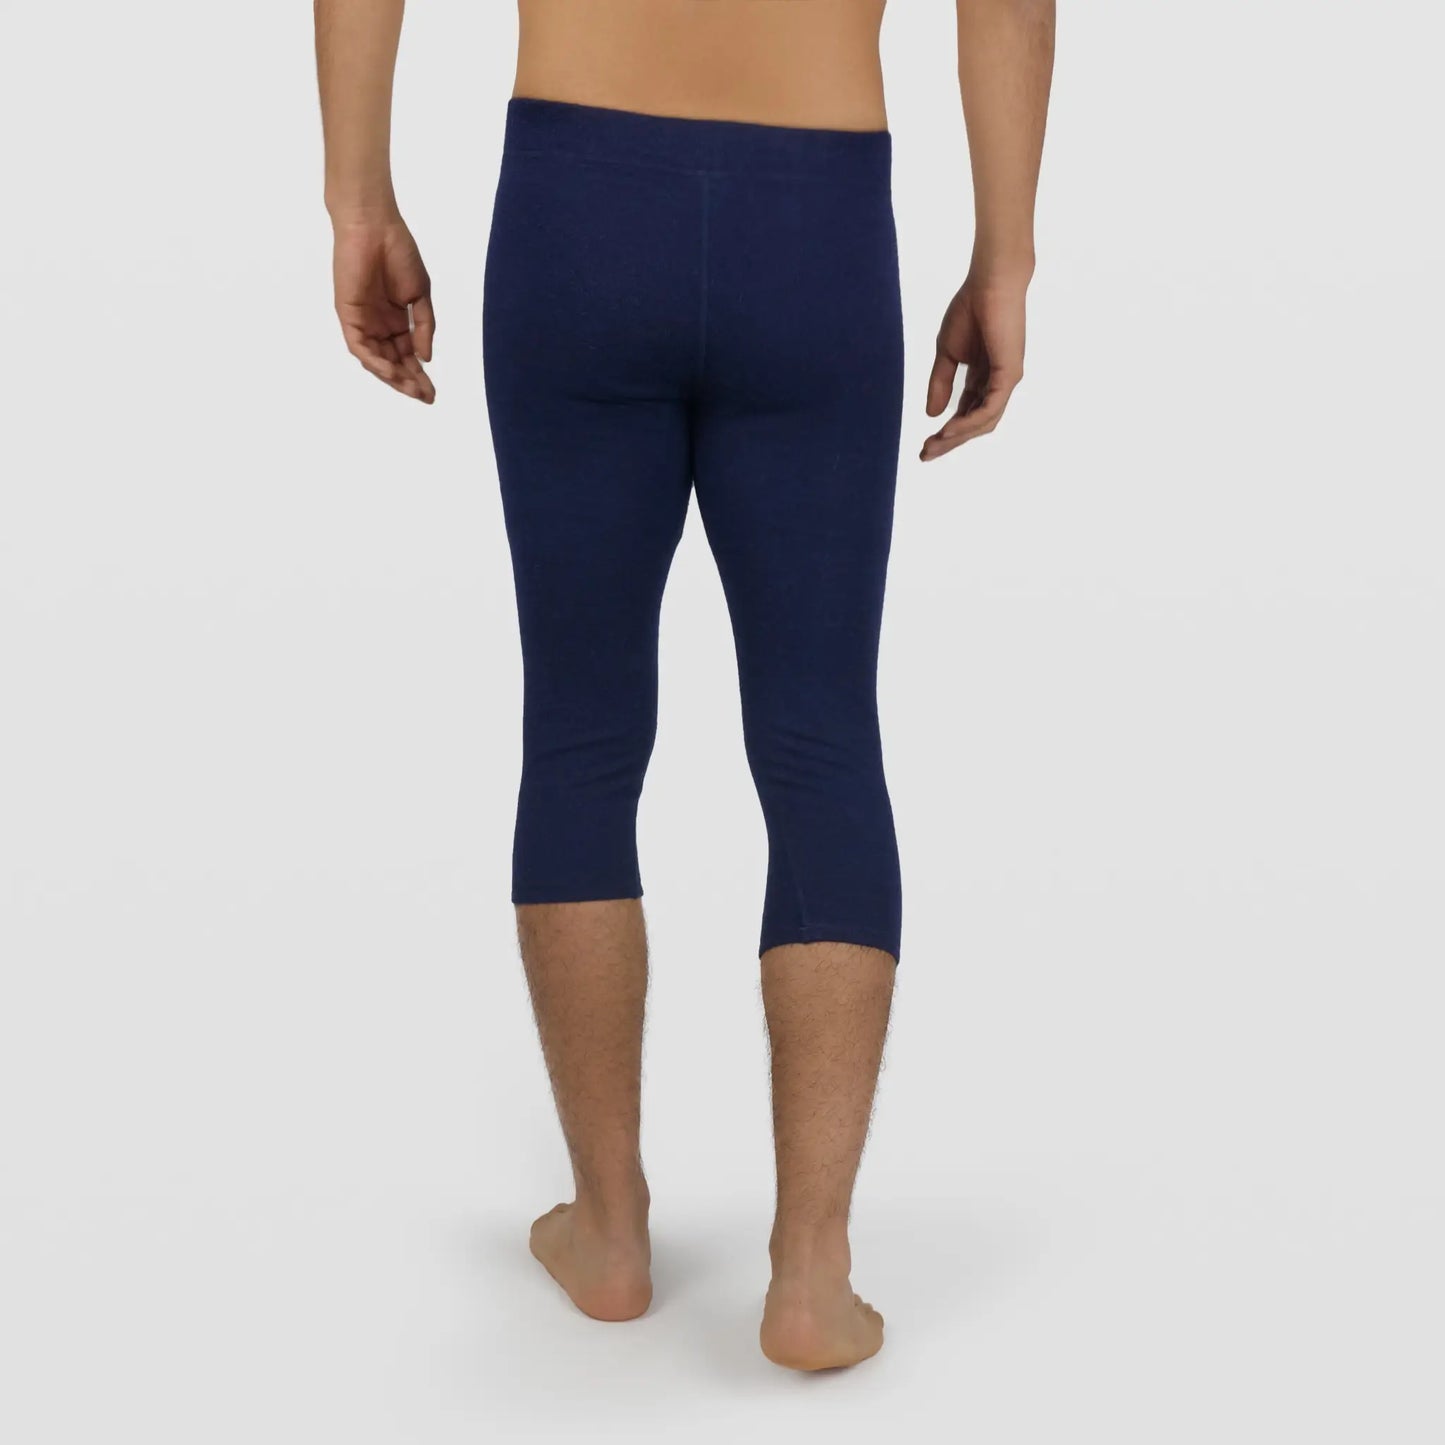 mens functional leggings 34 midweight color navy blue